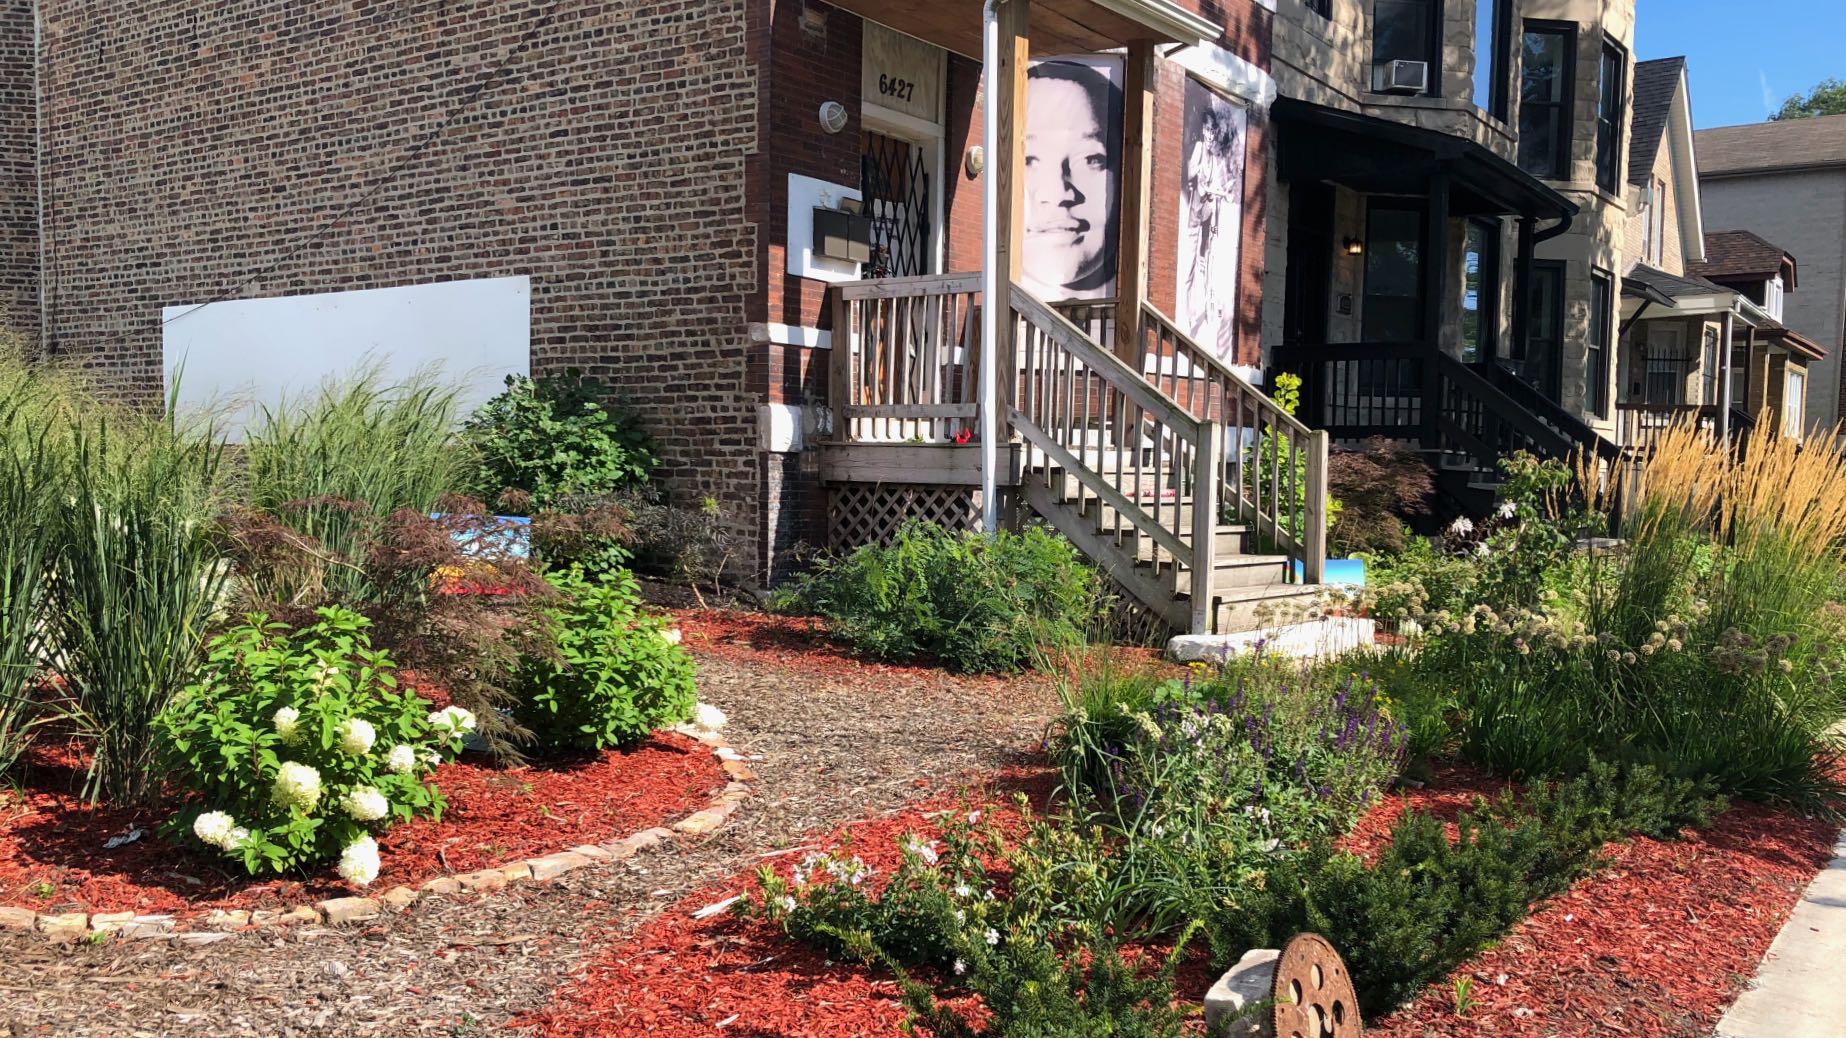 Fresh landscaping at the Emmett Till and Mamie Till-Mobley House. (Patty Wetli / WTTW News)